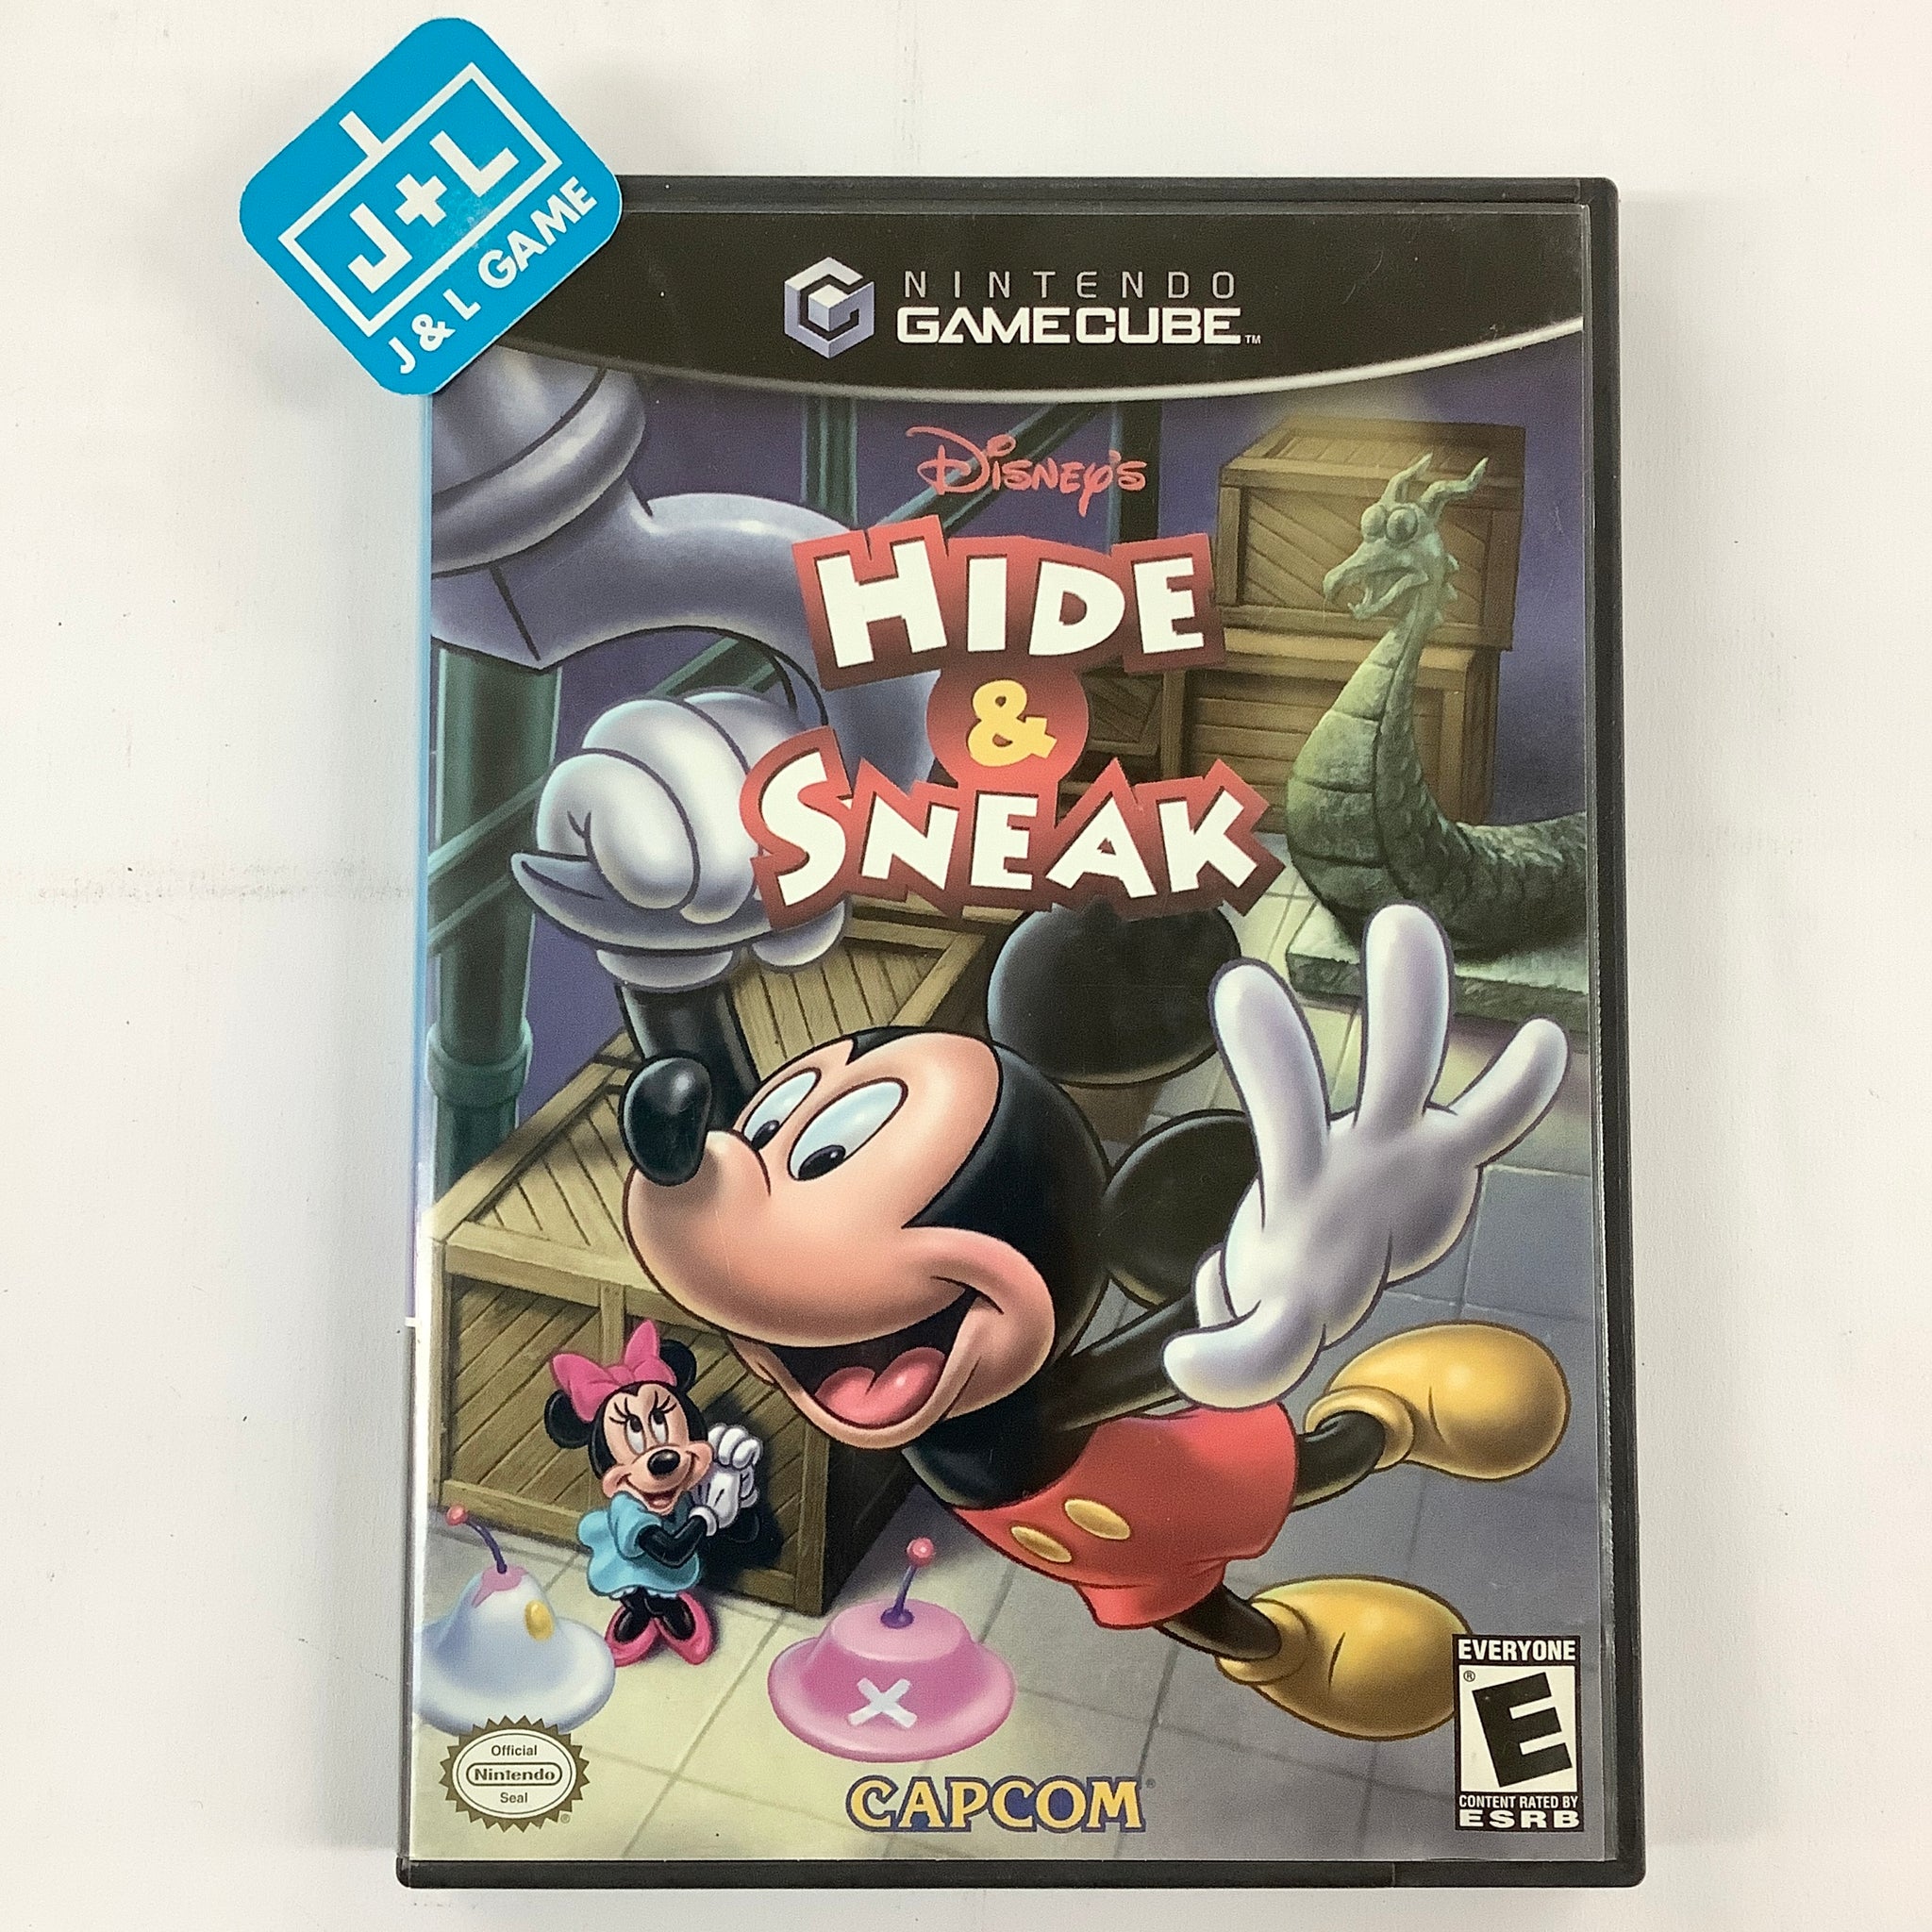 The best Switch stealth games – hide & sneak